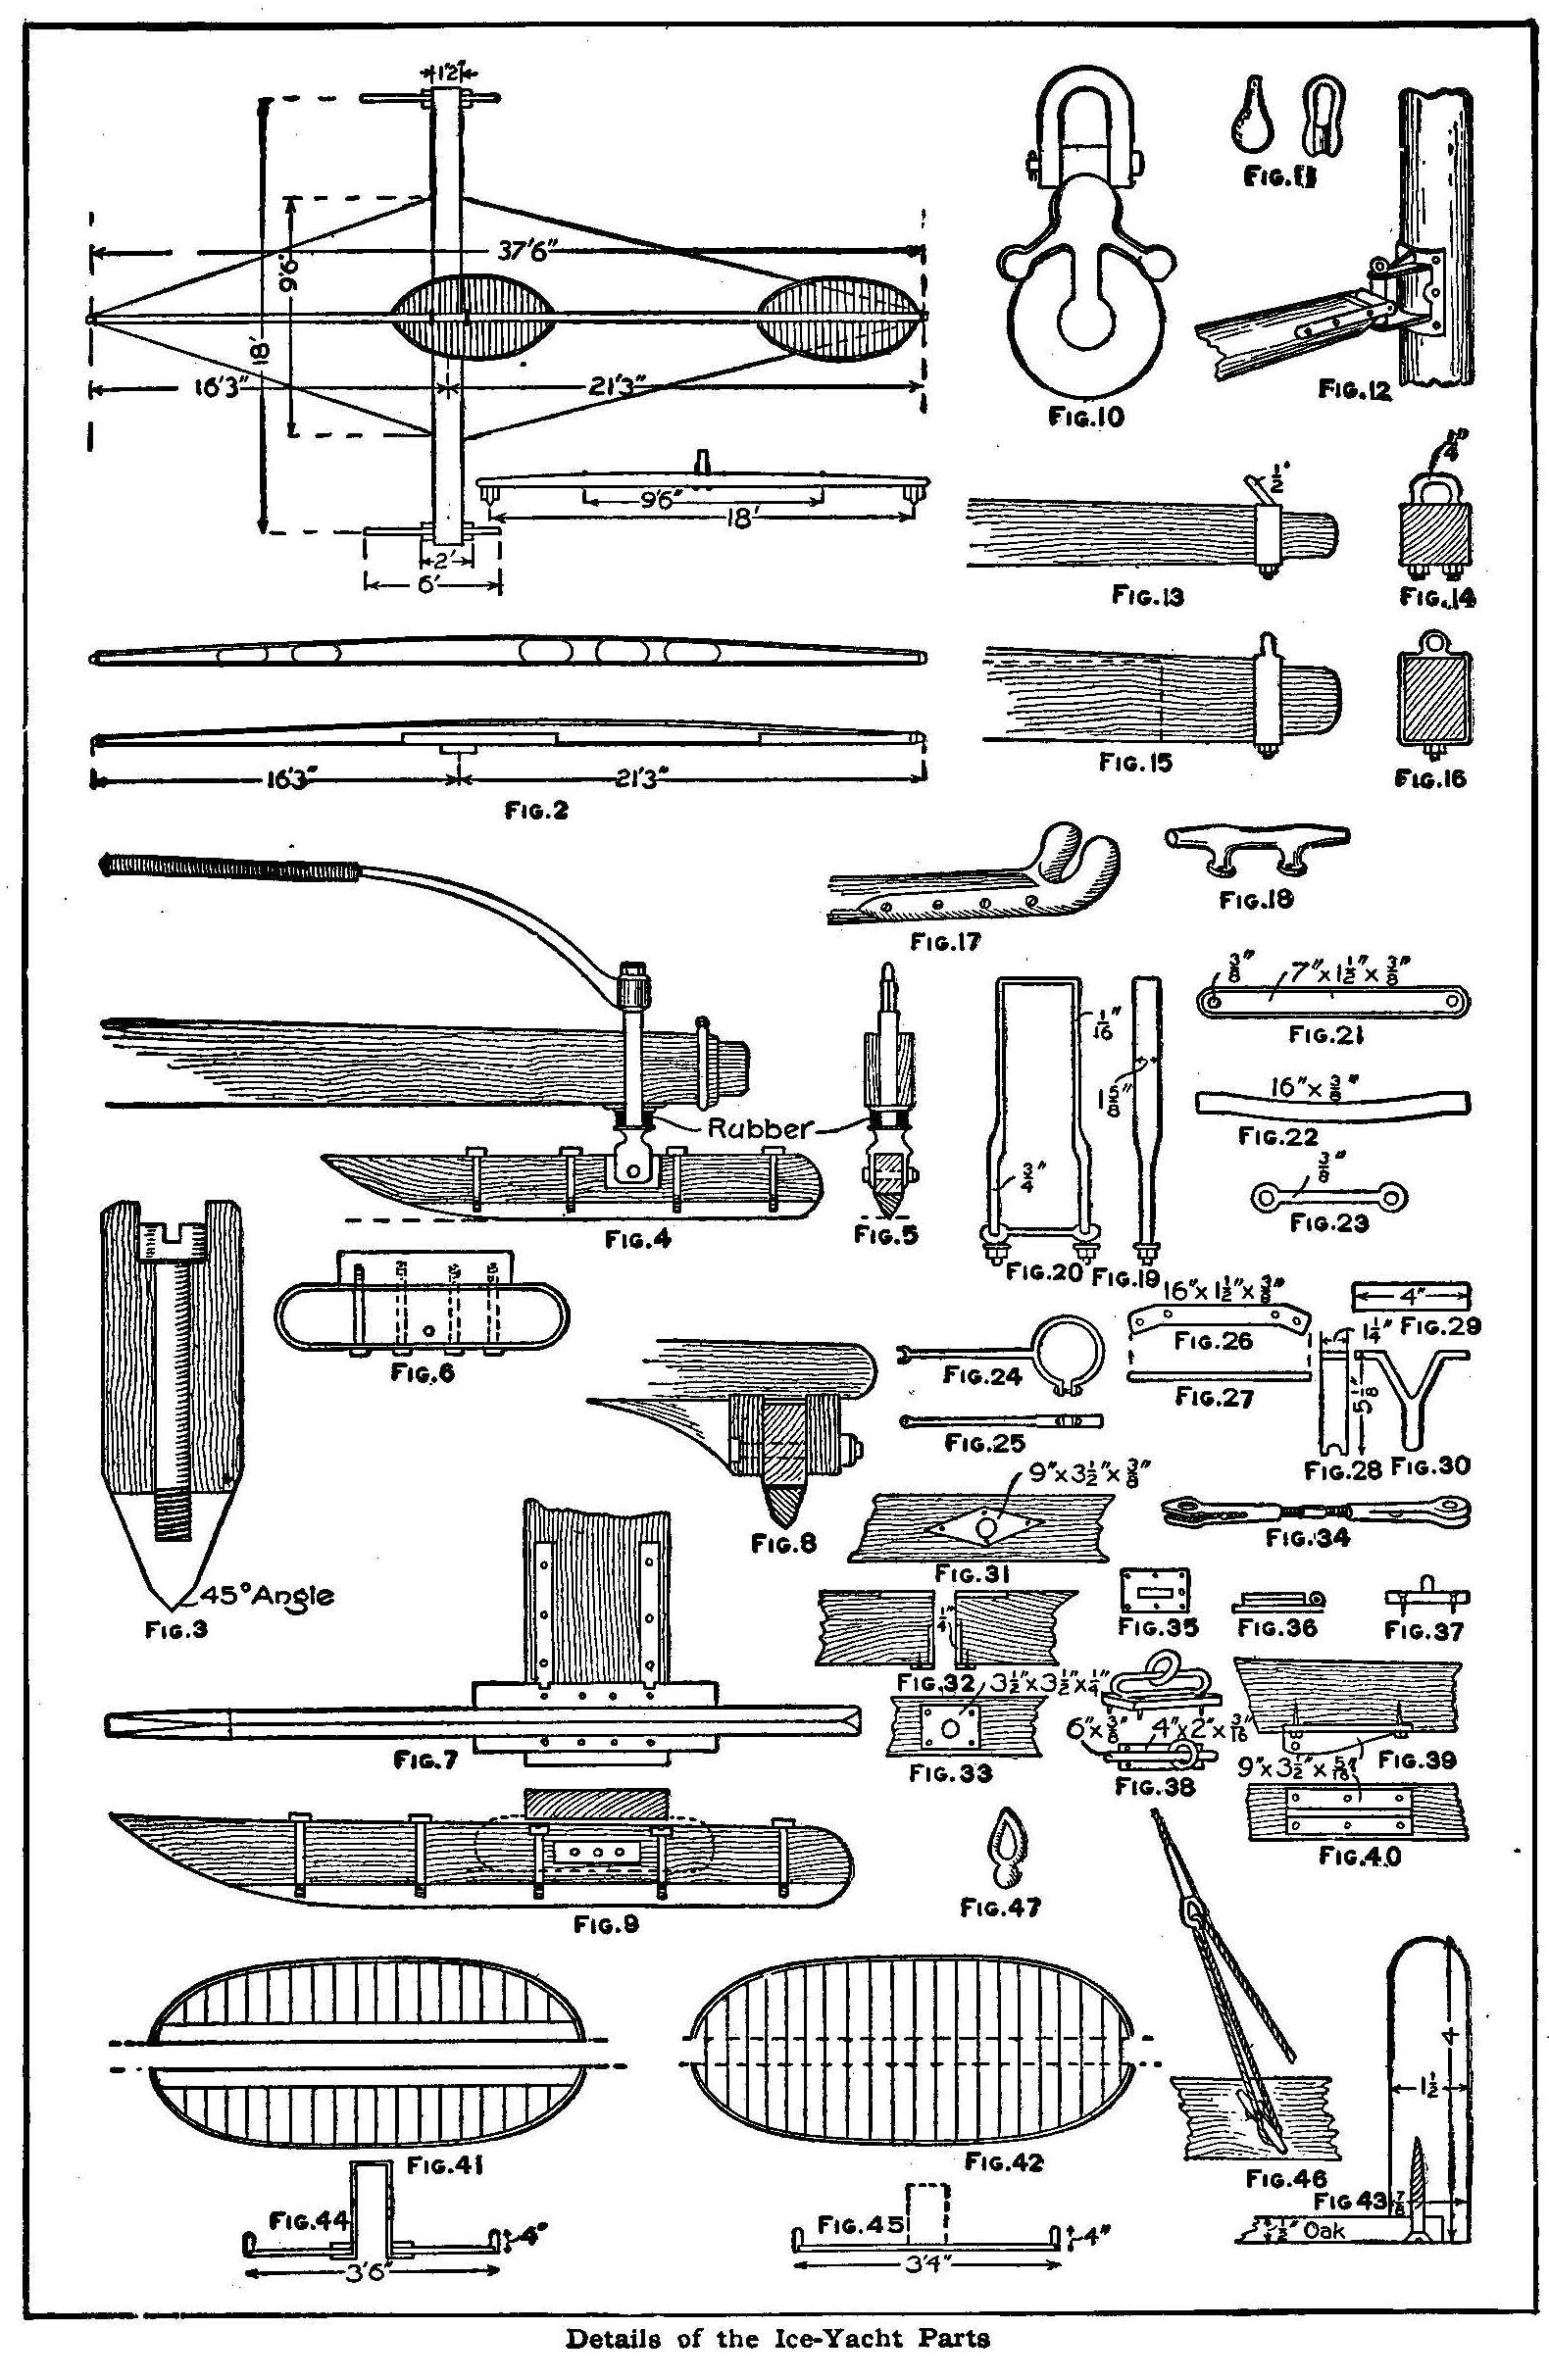 Details of the Ice-Yacht Parts 